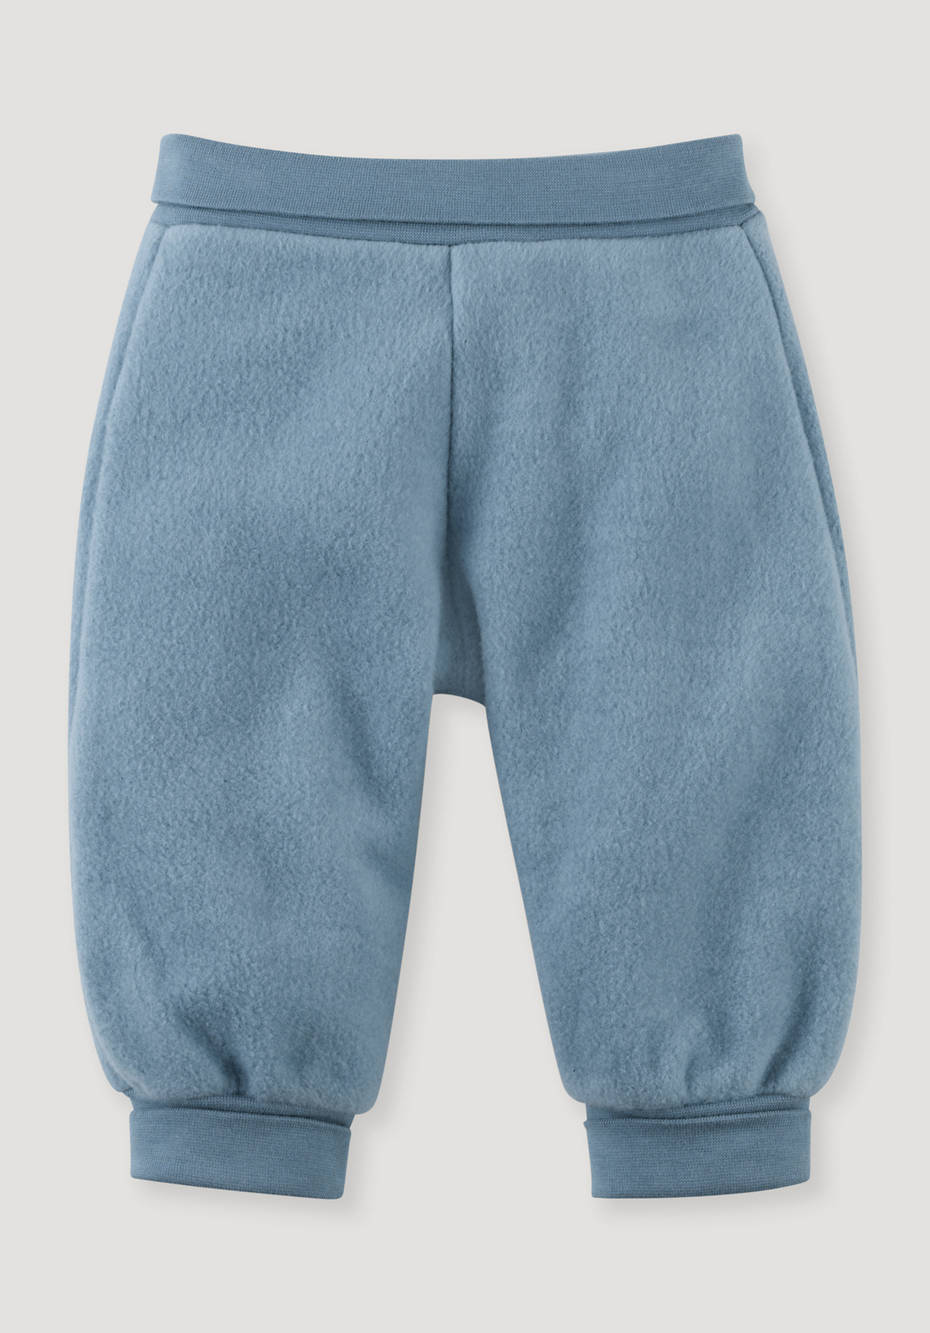 Fleece pants made from pure organic cotton